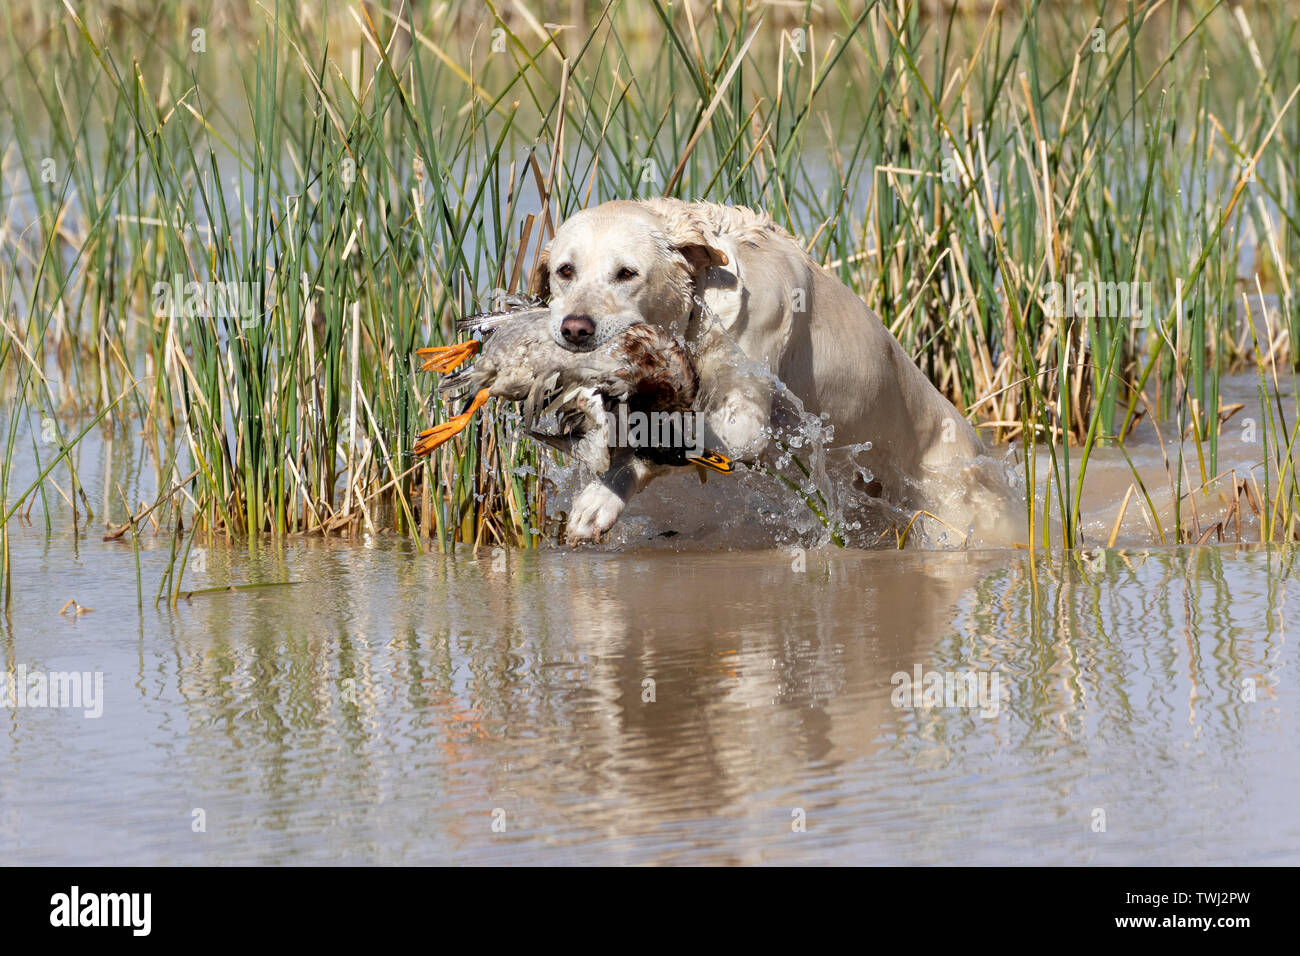 Labrador Retriever in the water retrieving a duck during a test Stock Photo